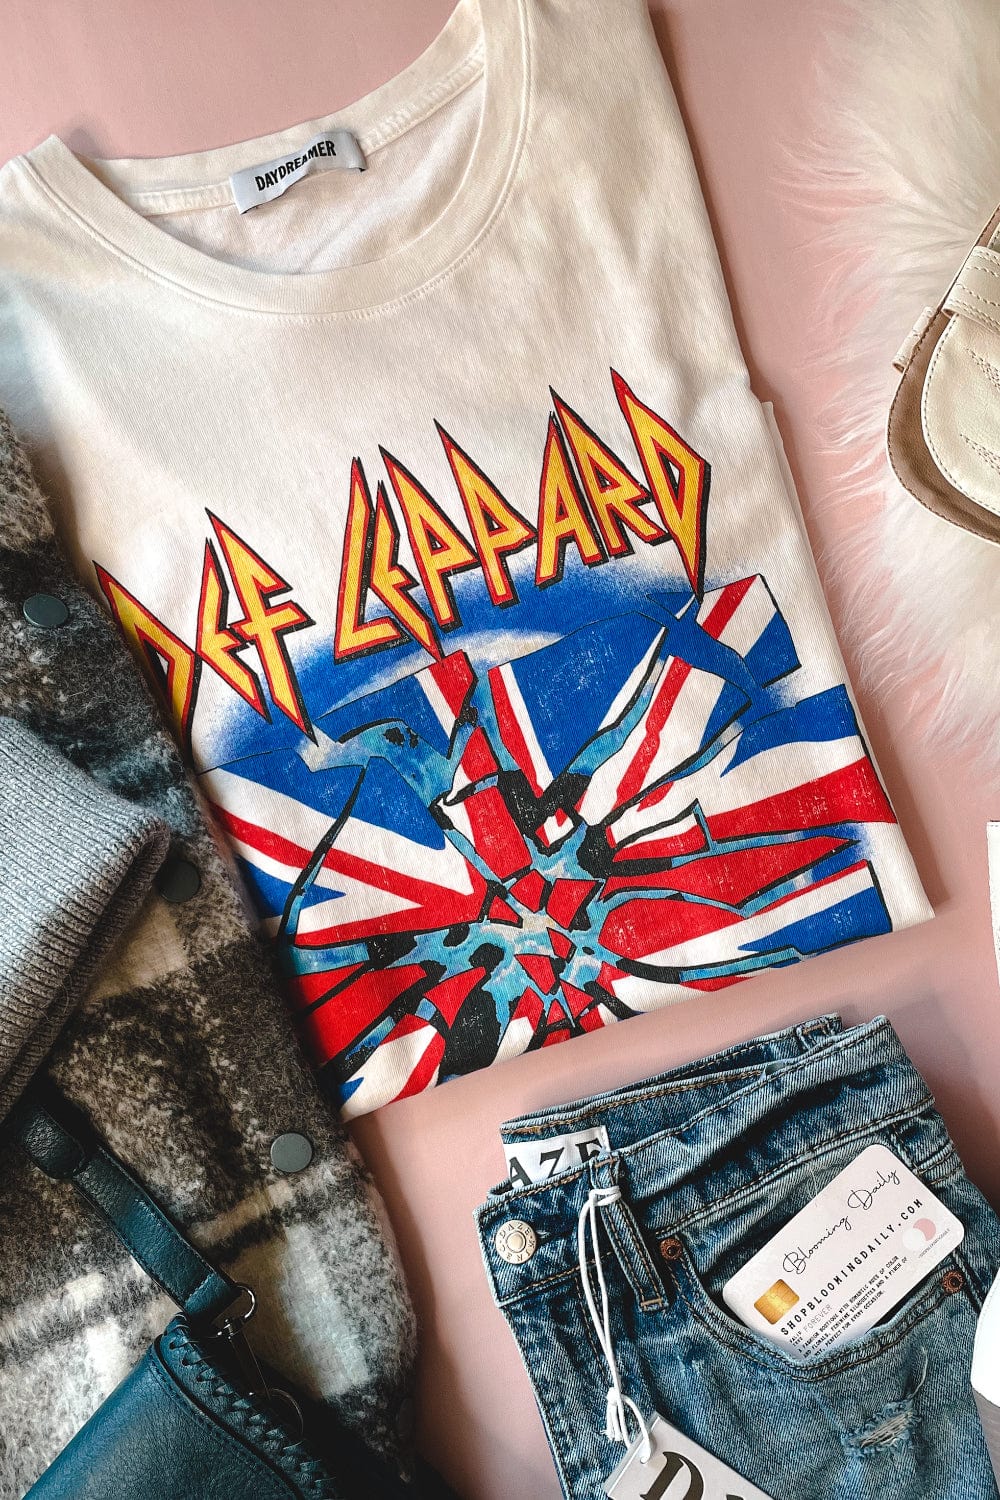 DAYDREAMER Def Leppard 1993 Never Ending Weekend Tour Tee in Vintage White - Graphic Tee - Blooming Daily